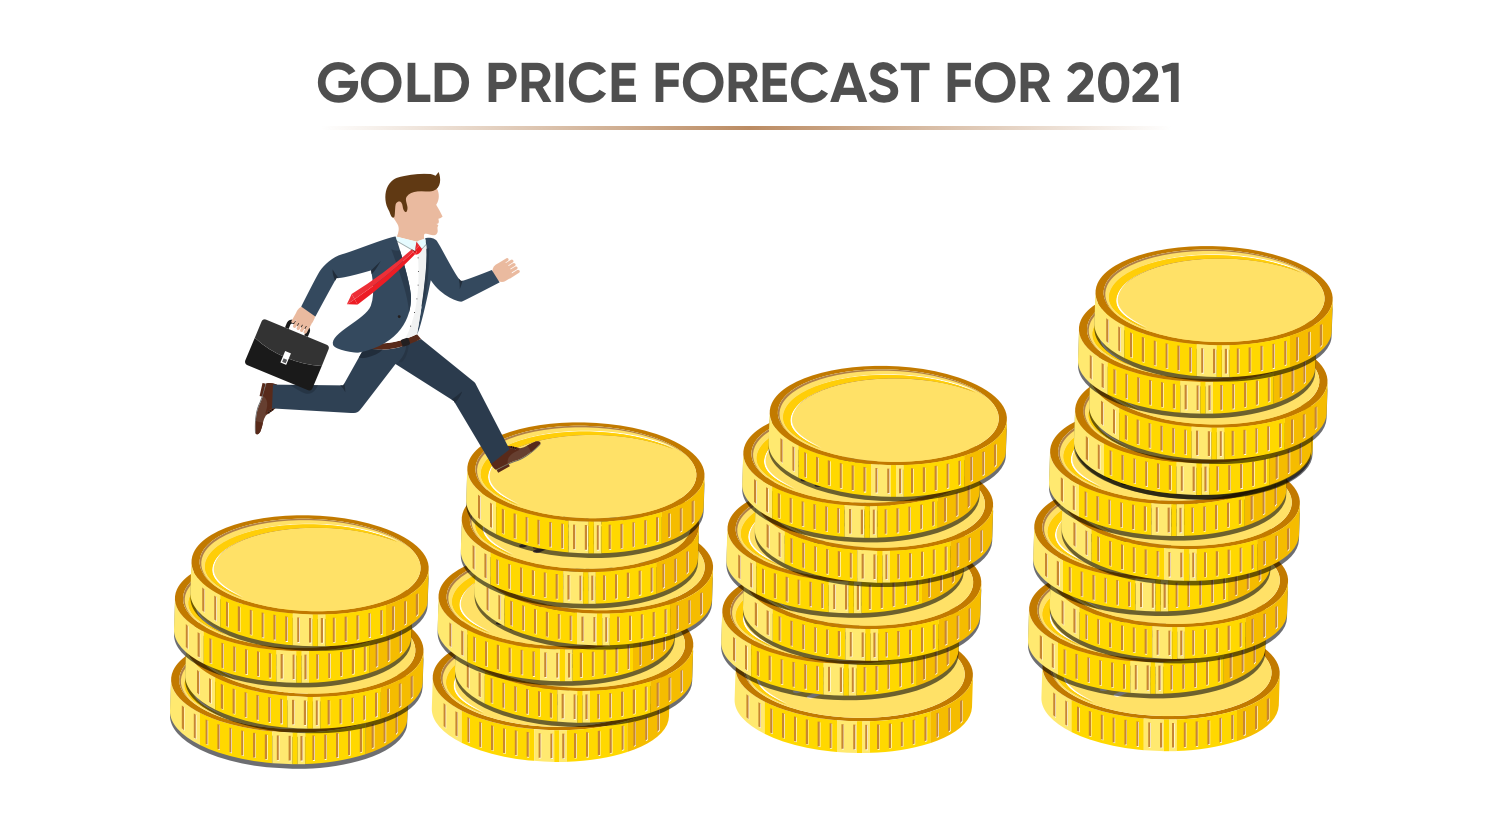 Gold price forecast for 2021